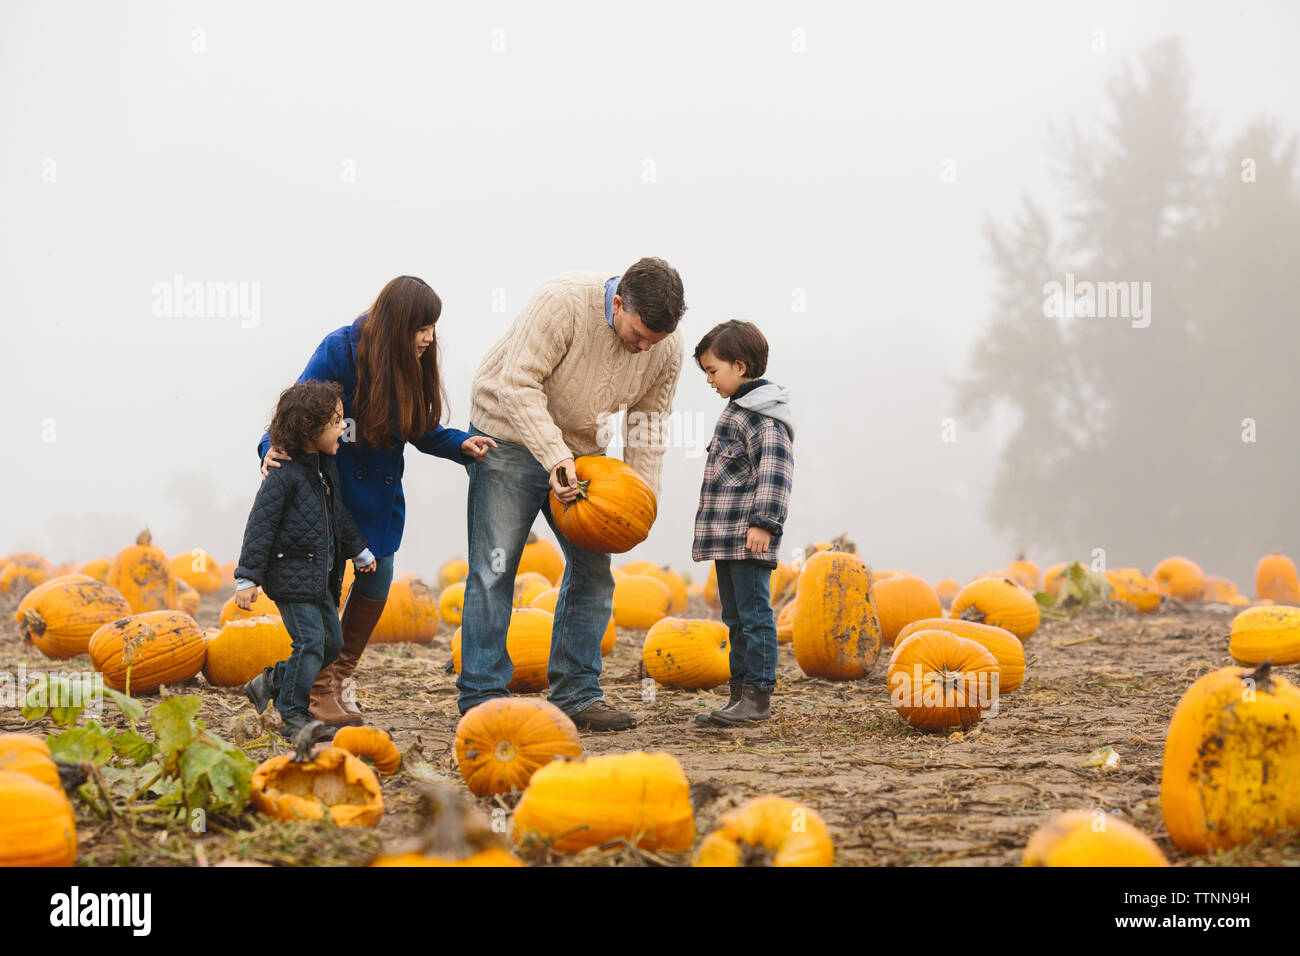 Parents with children examining pumpkins at farm during foggy weather Stock Photo